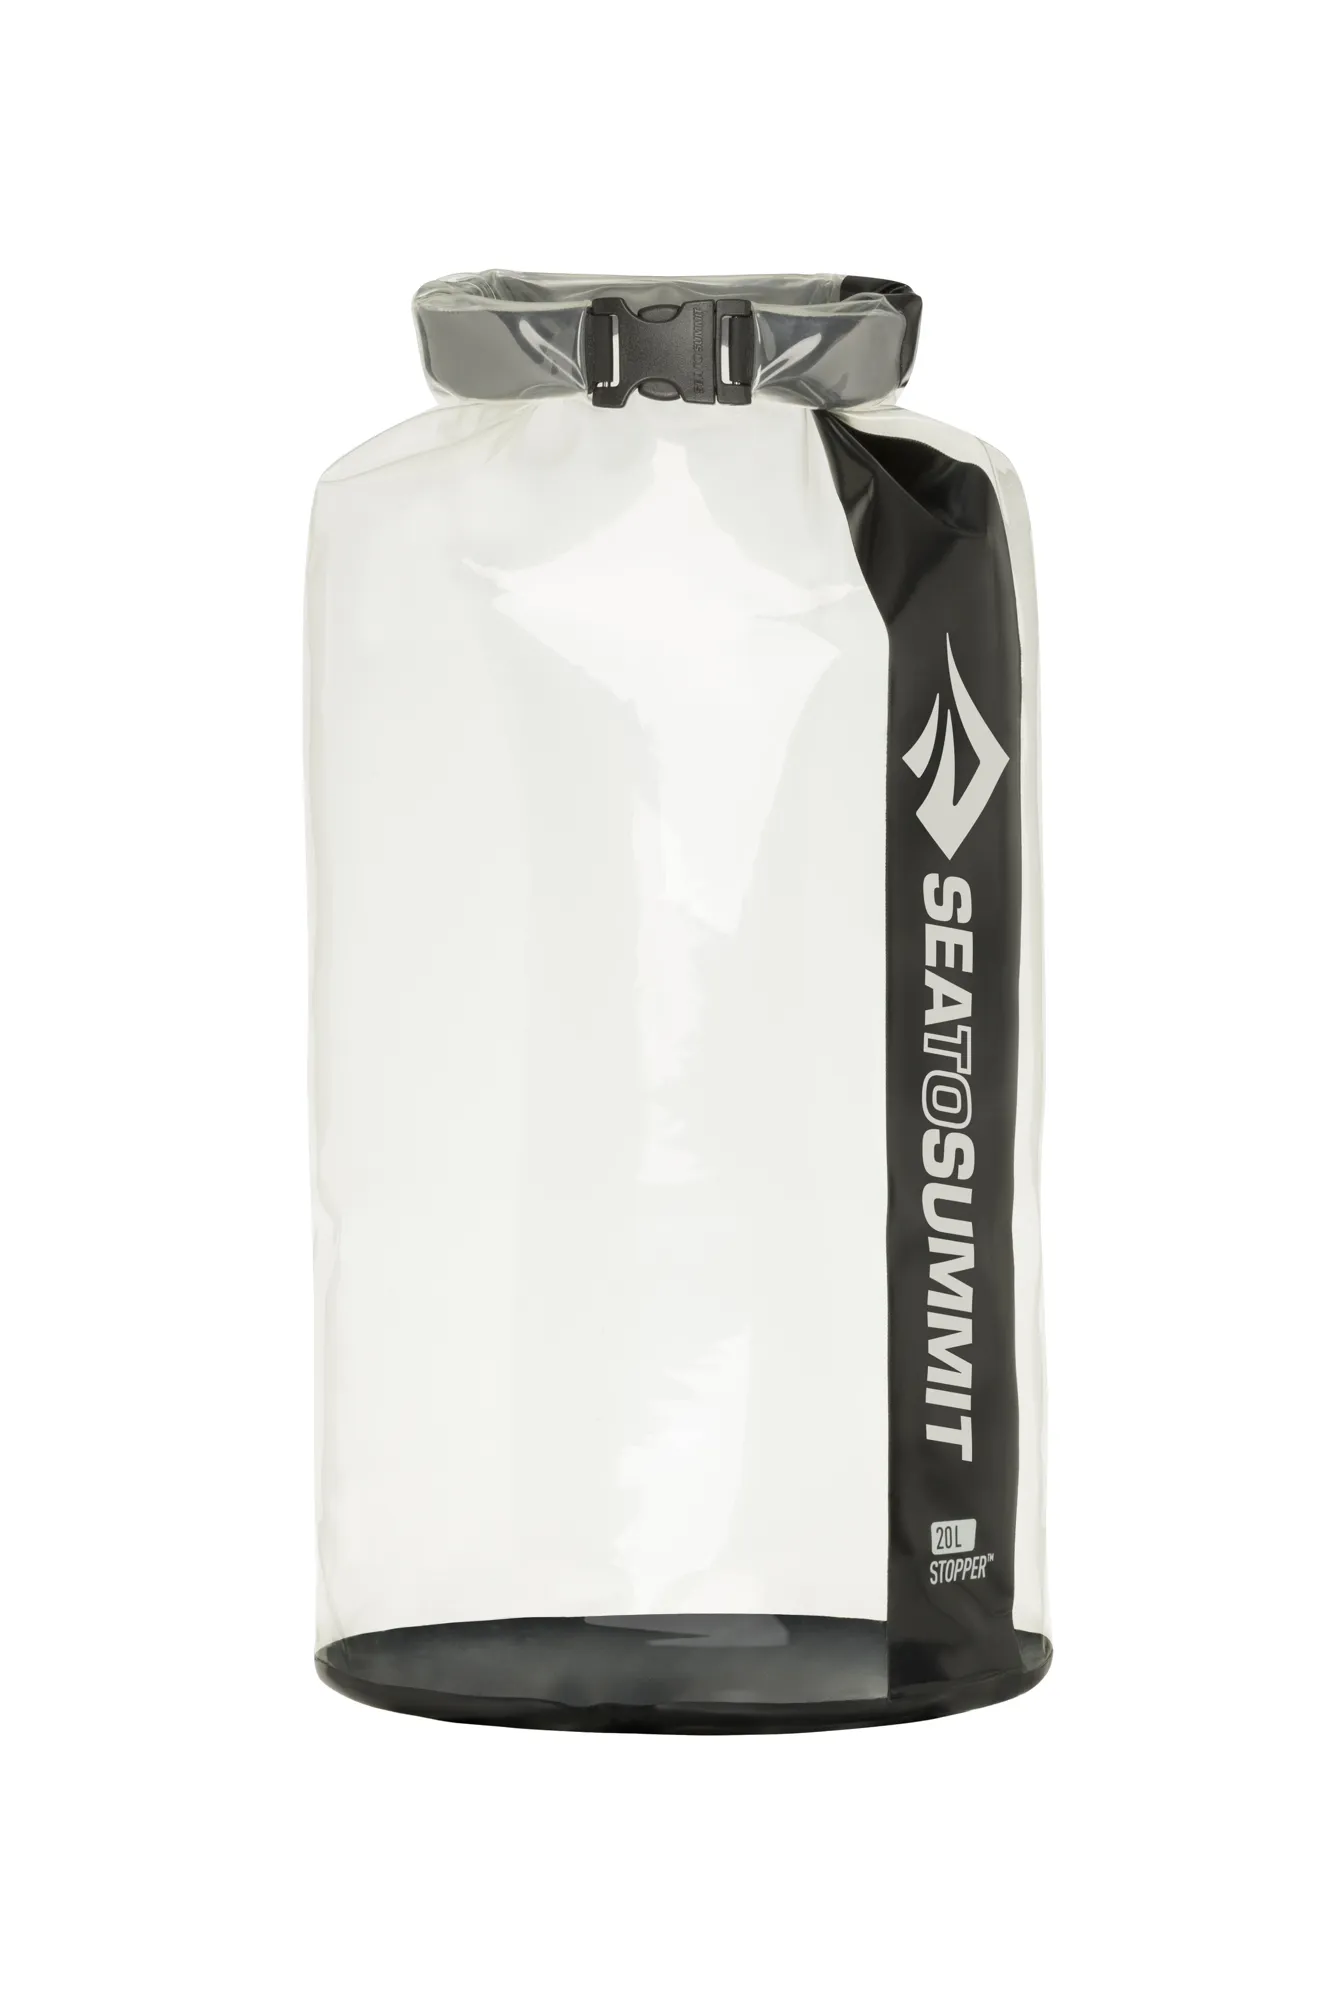 Sea to Summit - Stopper Clear Dry Bag - 20L